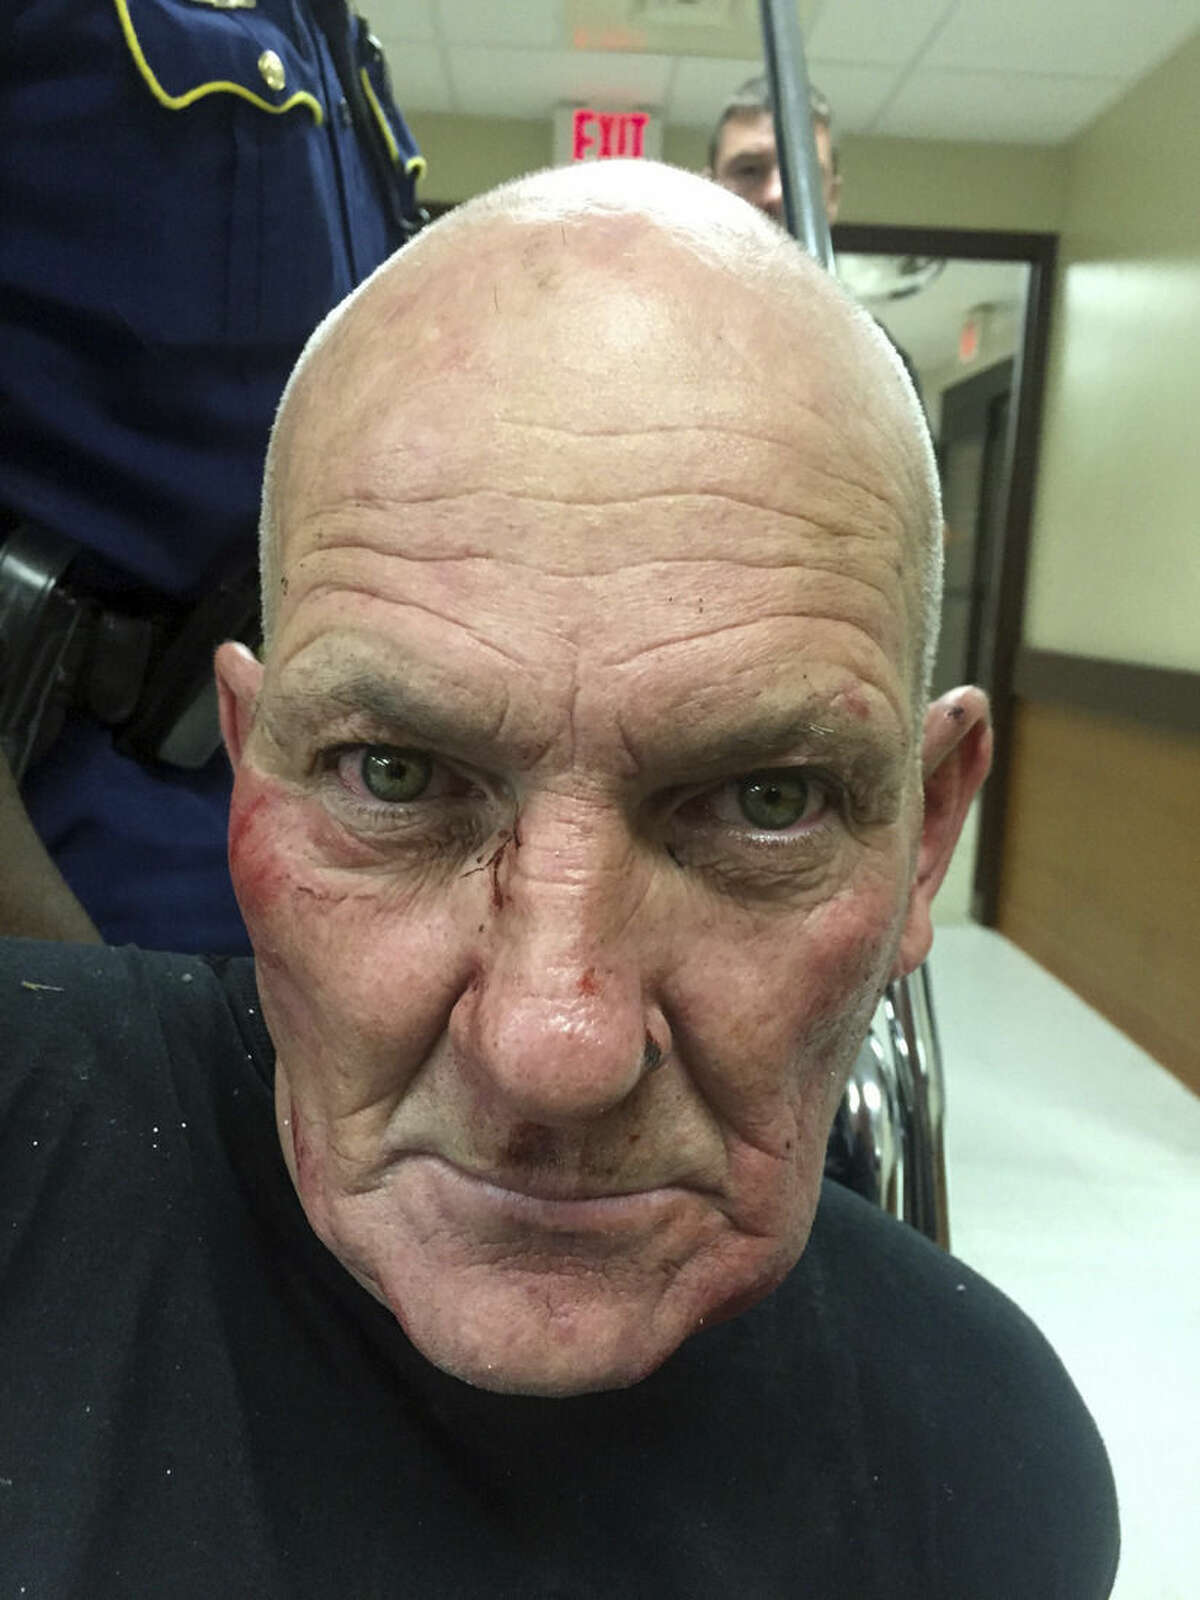 This photo released by the Louisiana State Police shows Kevin Daigle, 54, of Lake Charles, La. A Louisiana state trooper was shot in the head and critically injured Sunday, Aug. 23, 2015, during a struggle with a man whose pickup truck had run into a ditch after being reported as driving erratically, Louisiana State Police said. Col. Michael Edmonson, head of state police, said the arrested man. Col. Mike Edmonson, head of the Louisiana State Police, says 43-year-old Senior Trooper Steven Vincent died Monday, Aug. 24, 2015, at a hospital in Lake Charles, La. (Louisiana State Police via AP)